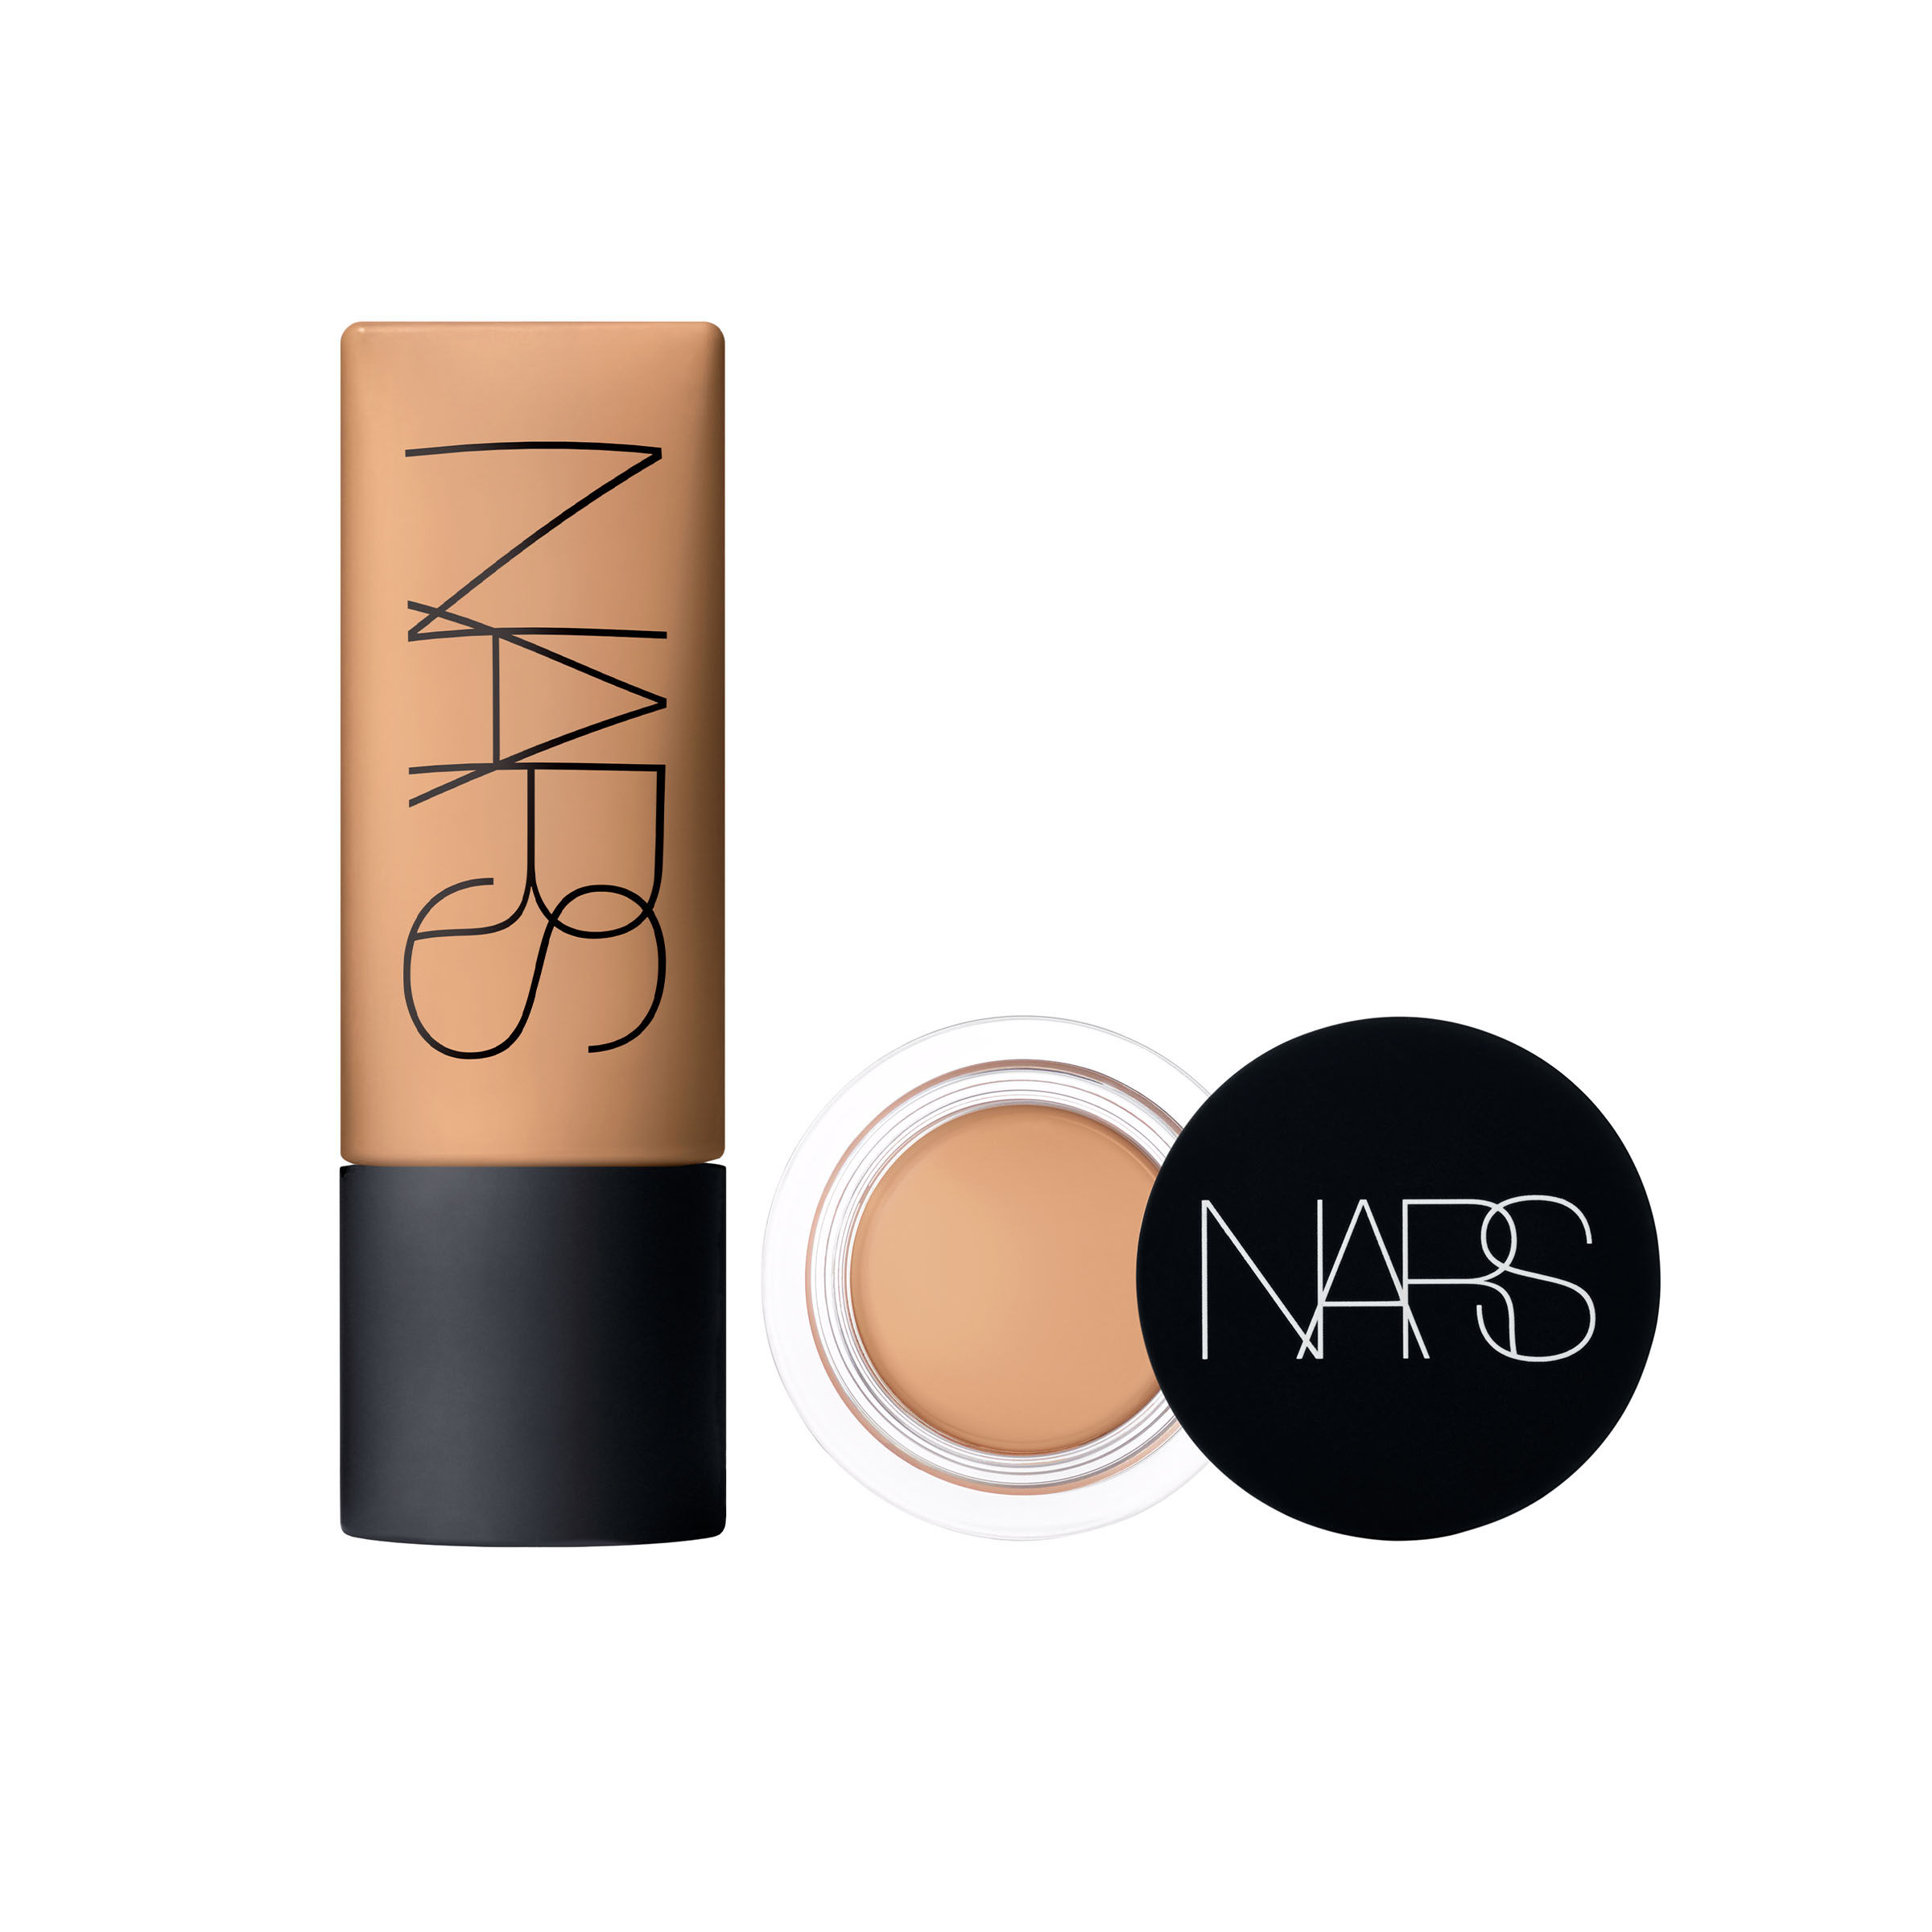 The Matte Concealer and Foundation | NARS Cosmetics